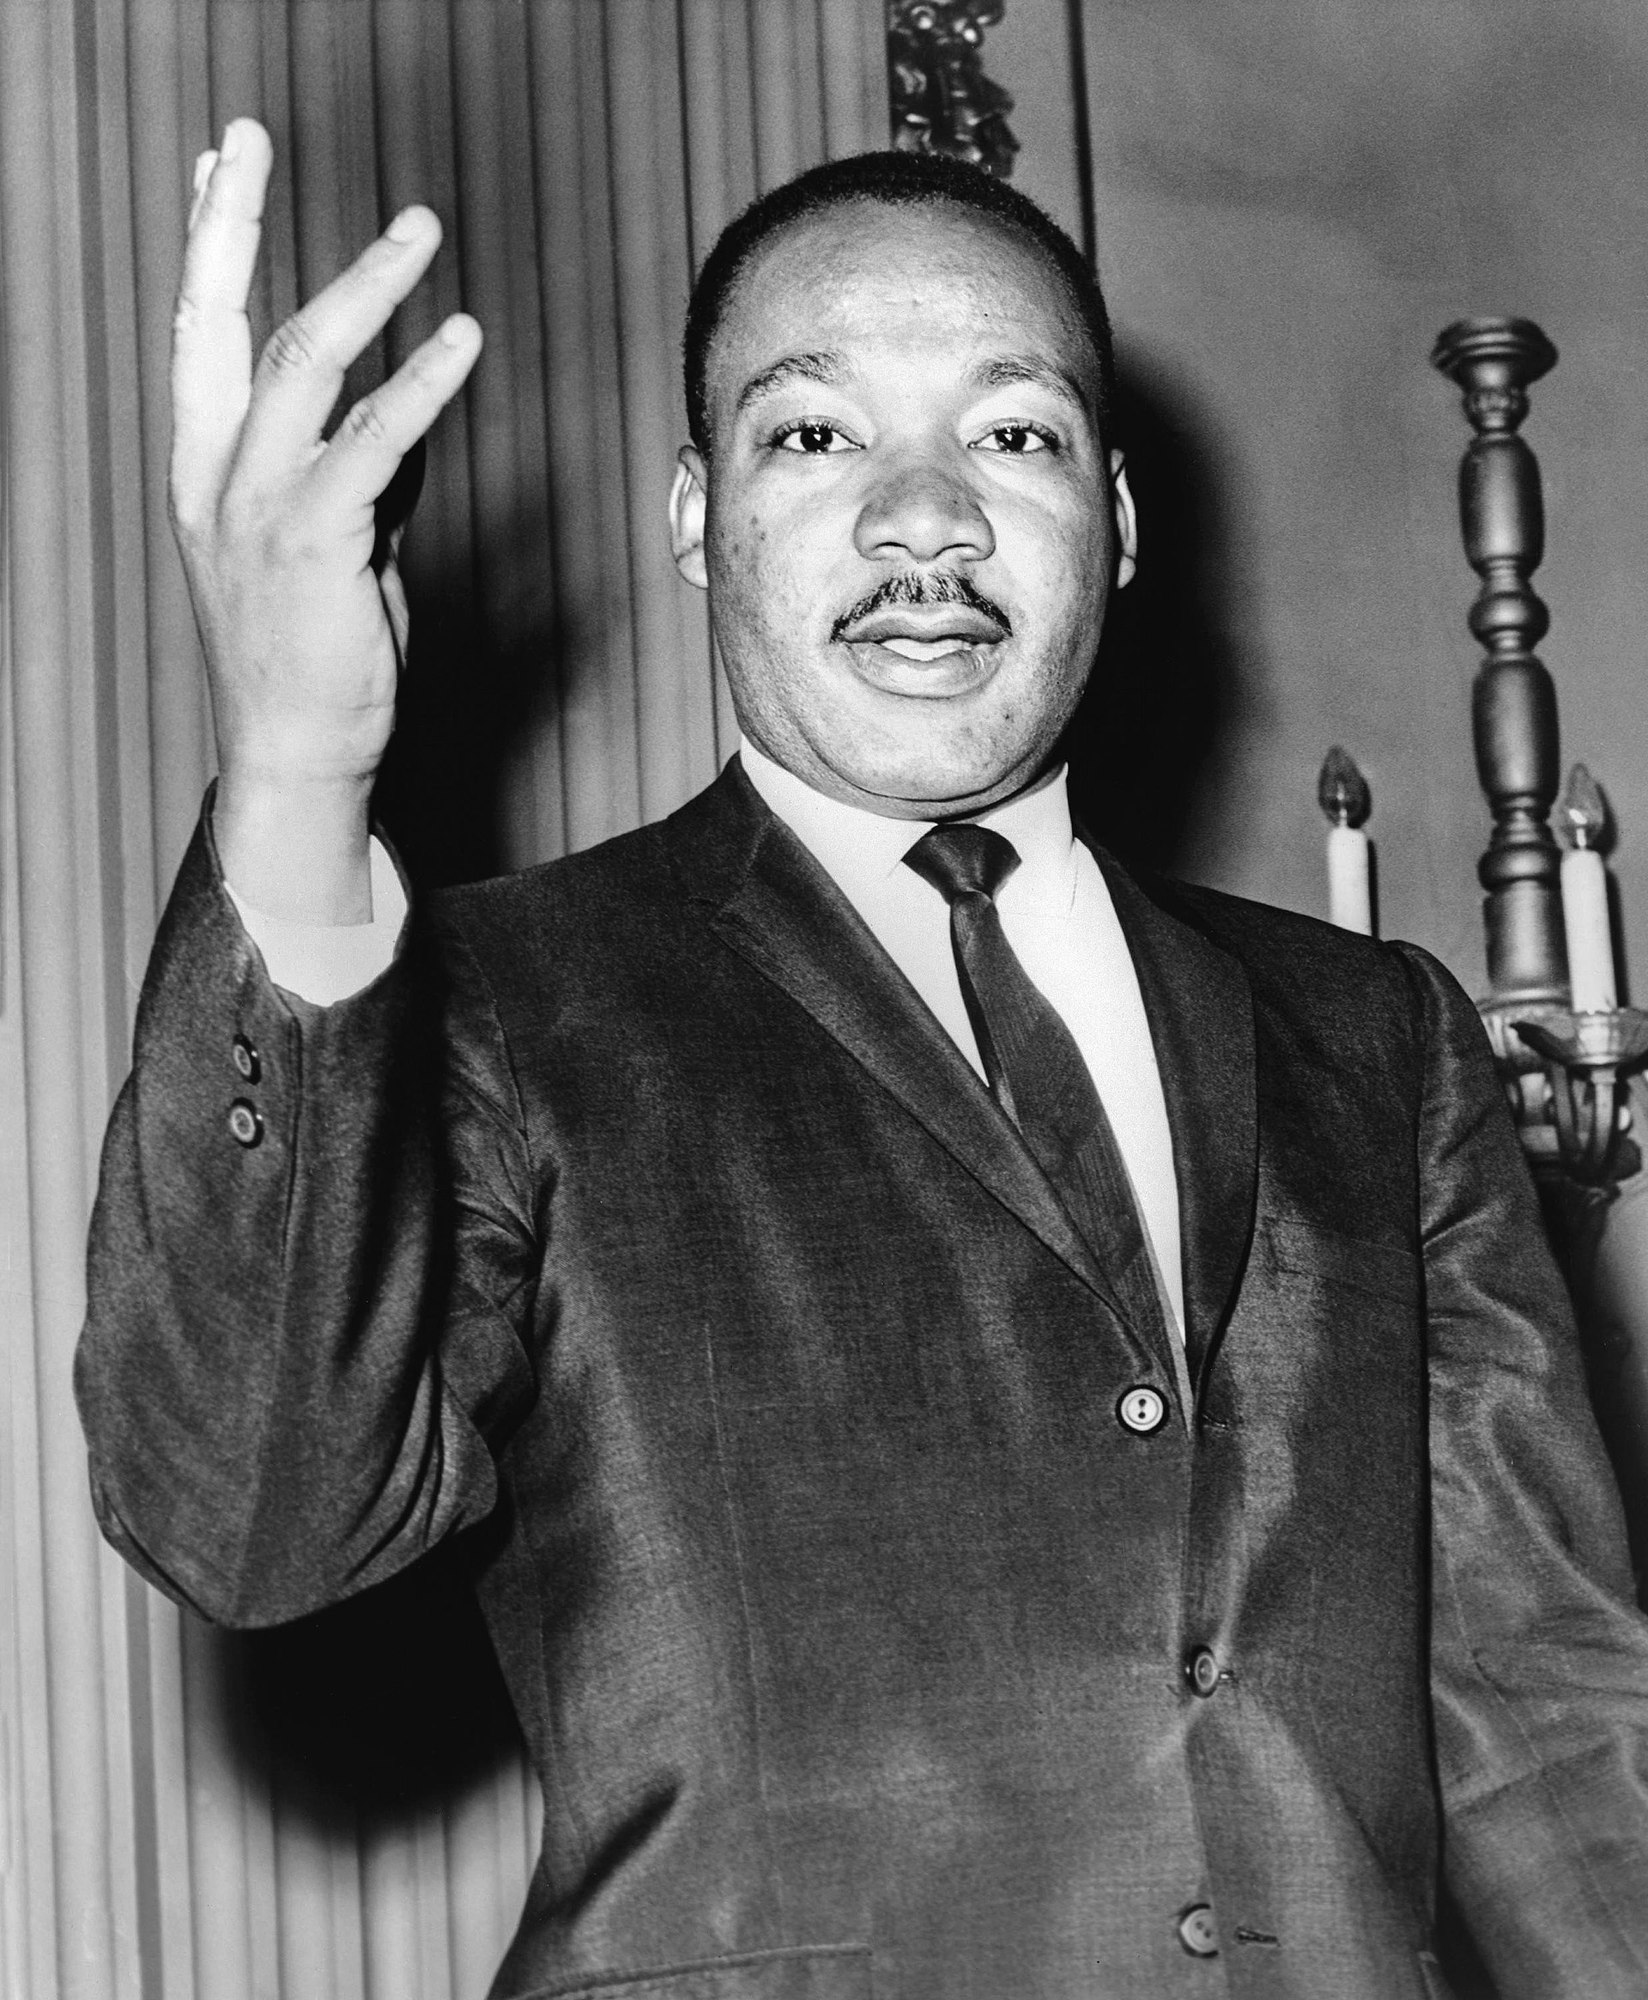 Martin Luther King Jr. Courtesy of the U.S. Library of Congress/Wikimedia Commons